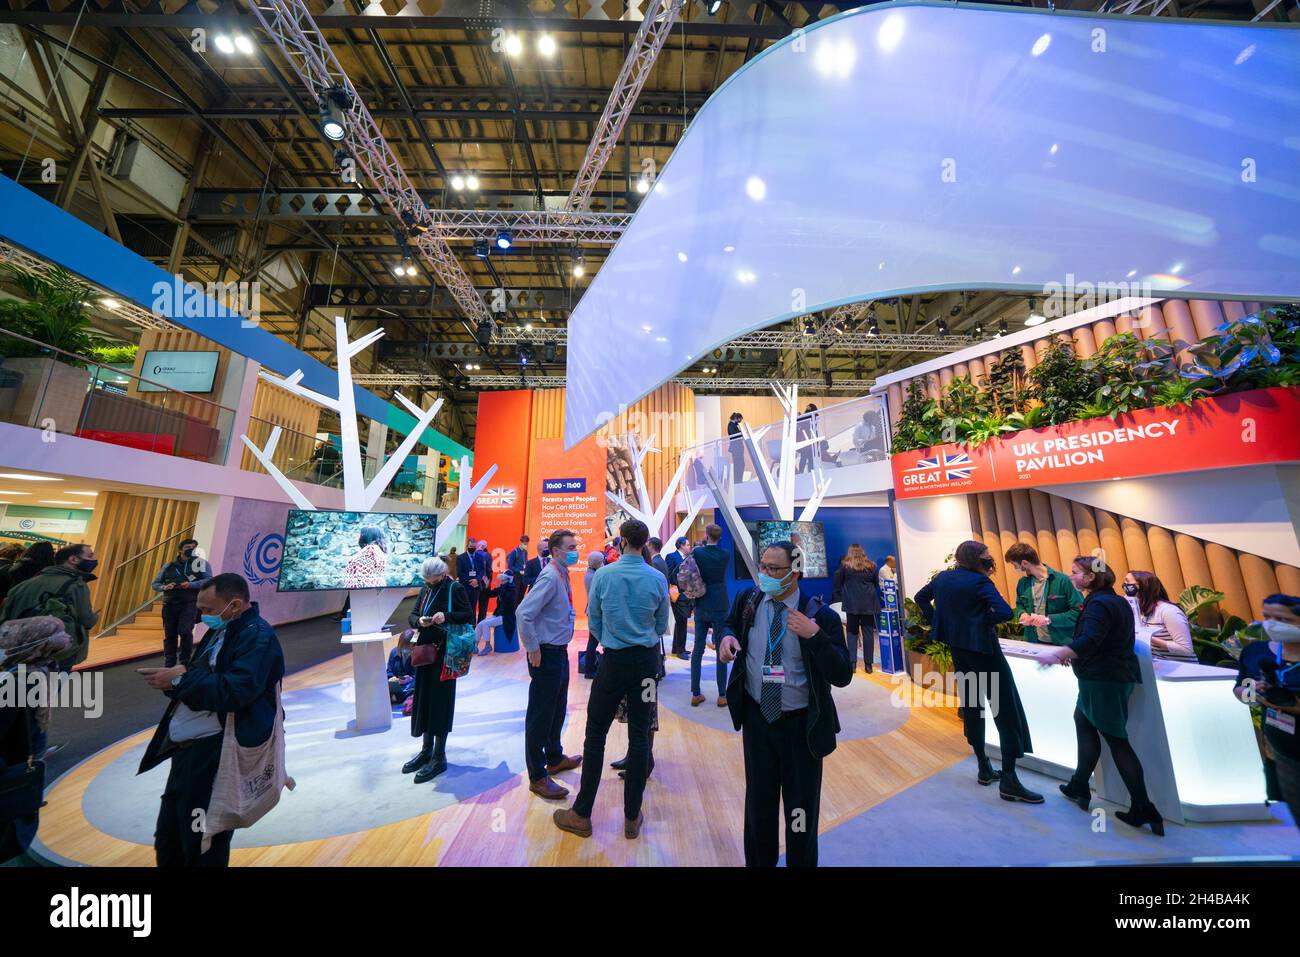 Glasgow, Scotland, UK. 1st November 2021. Images from Monday at the UN climate change conference in Glasgow. Pic; Host nation UK Presidency Pavilion .  Iain Masterton/Alamy Live News. Stock Photo